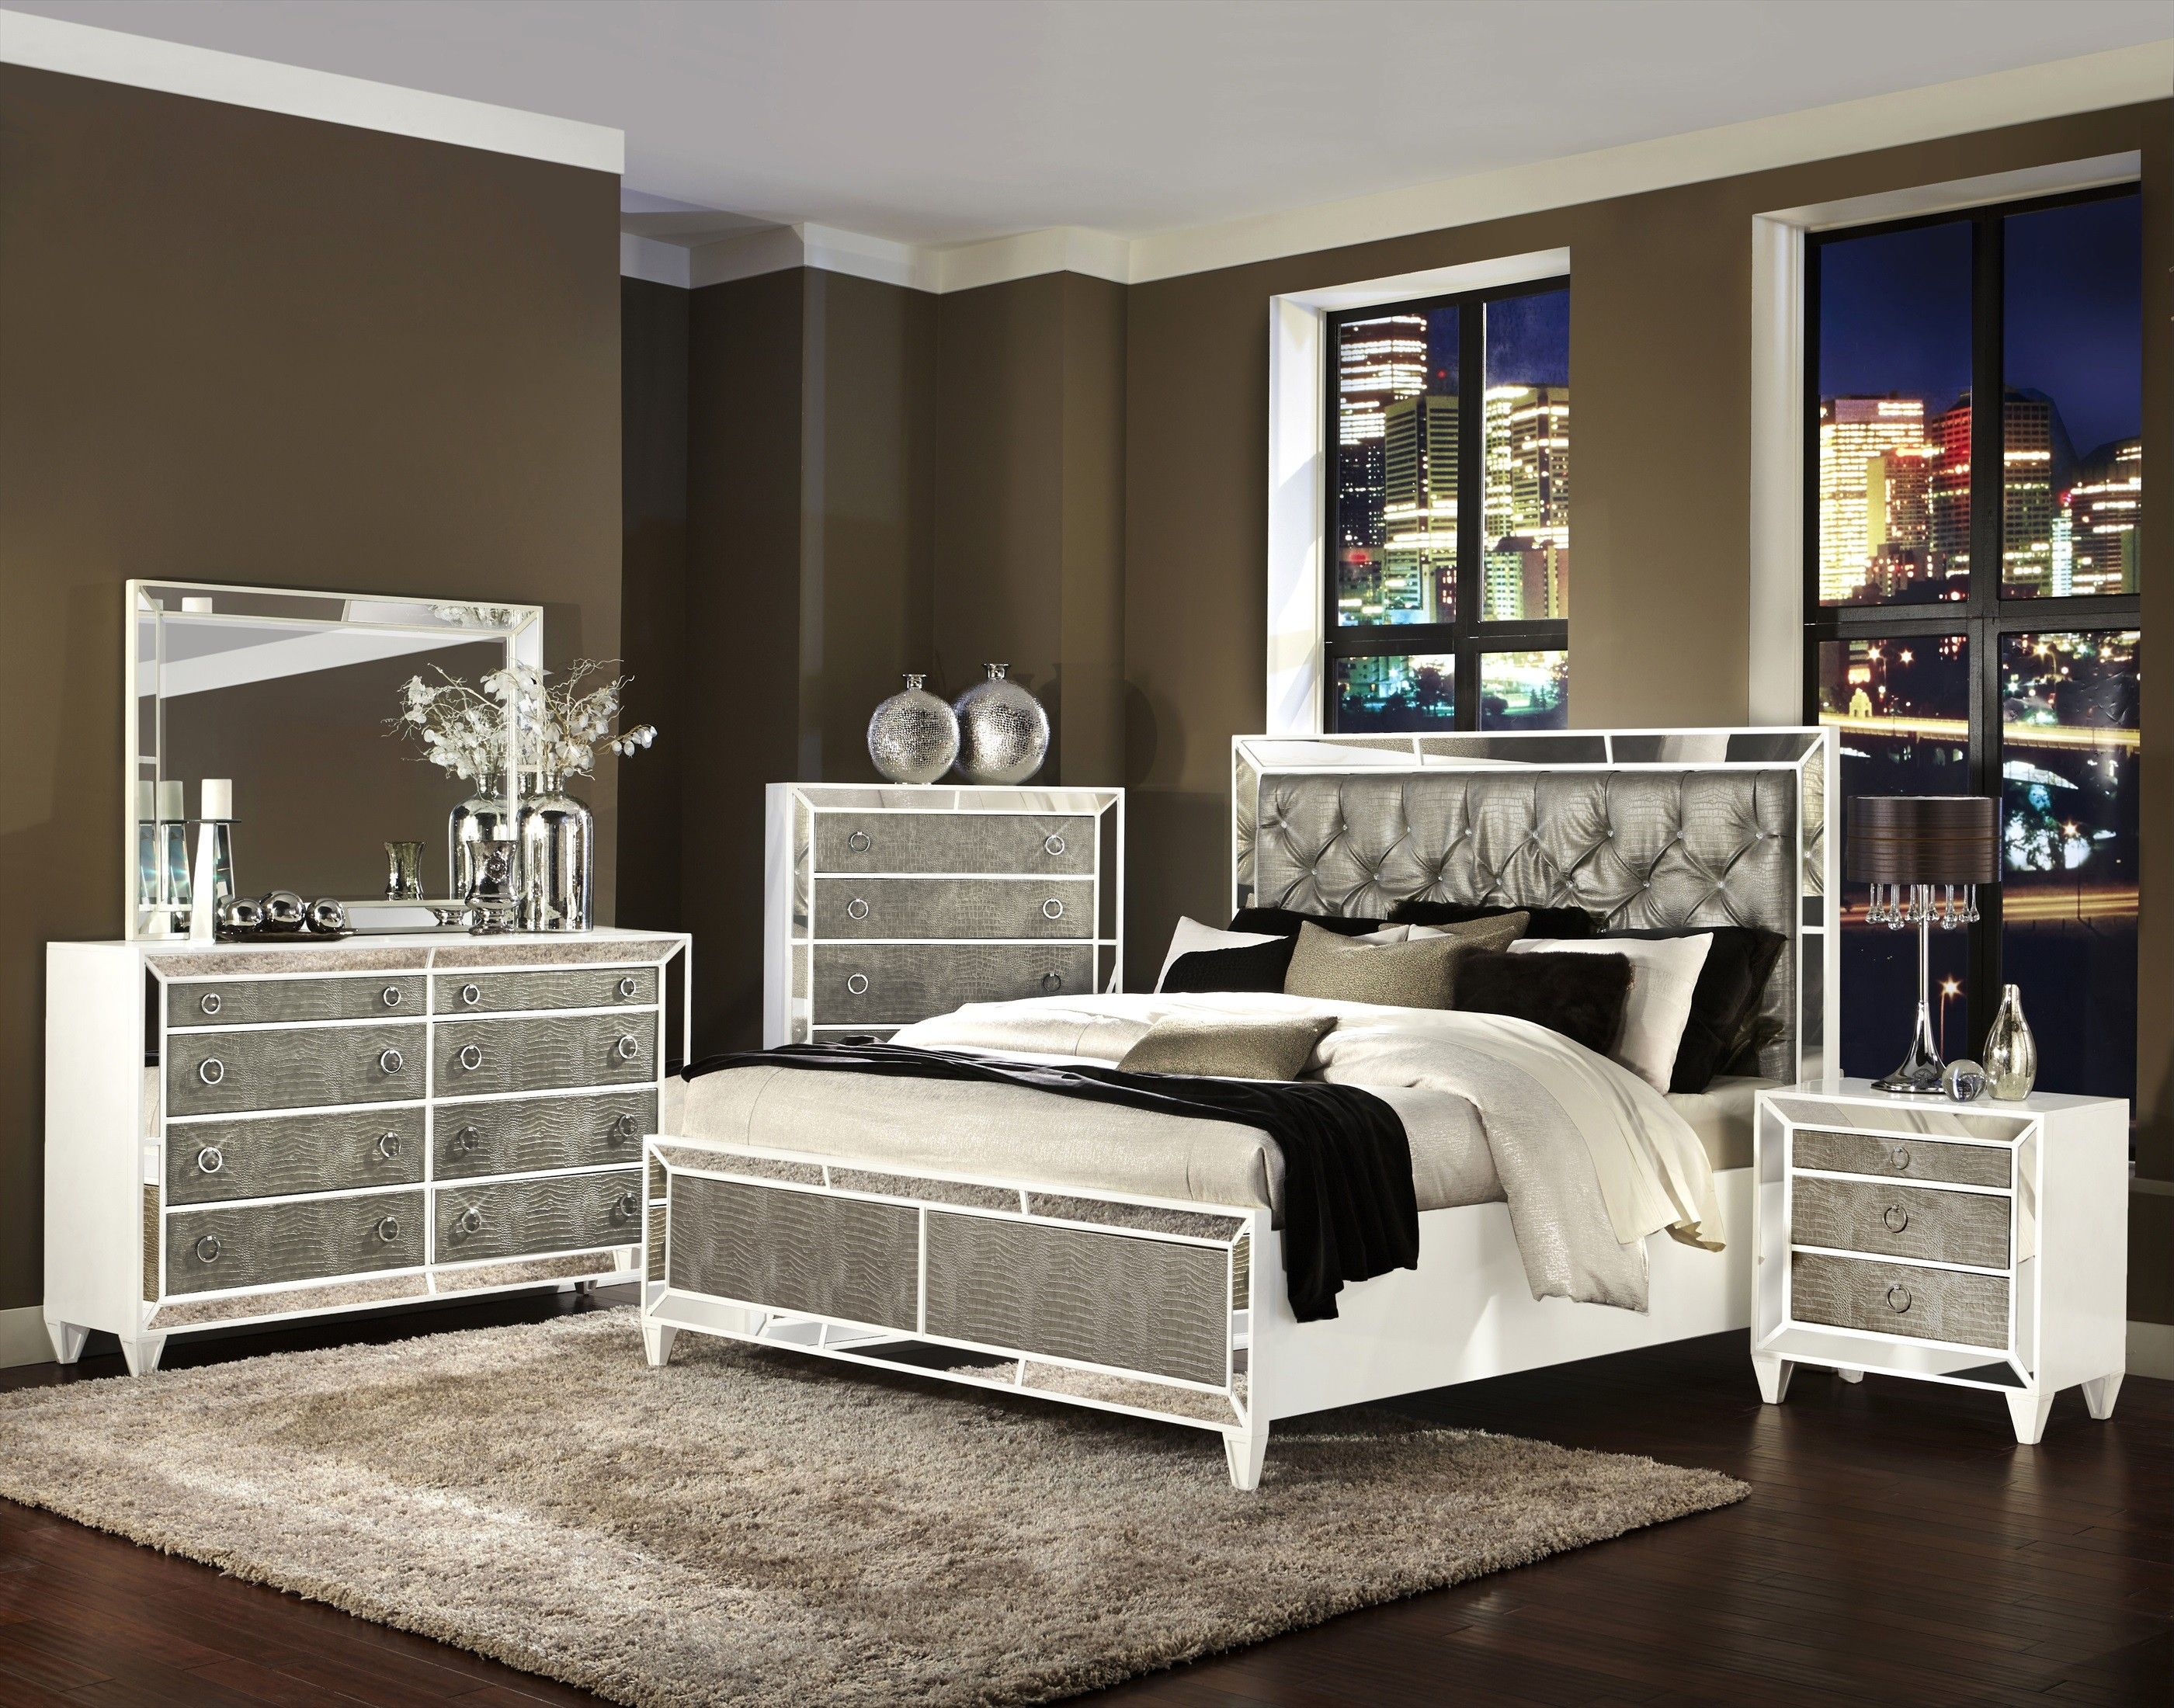 Transitional Pearlized White Design Glass Bedroom Set Glass pertaining to measurements 2800 X 2200